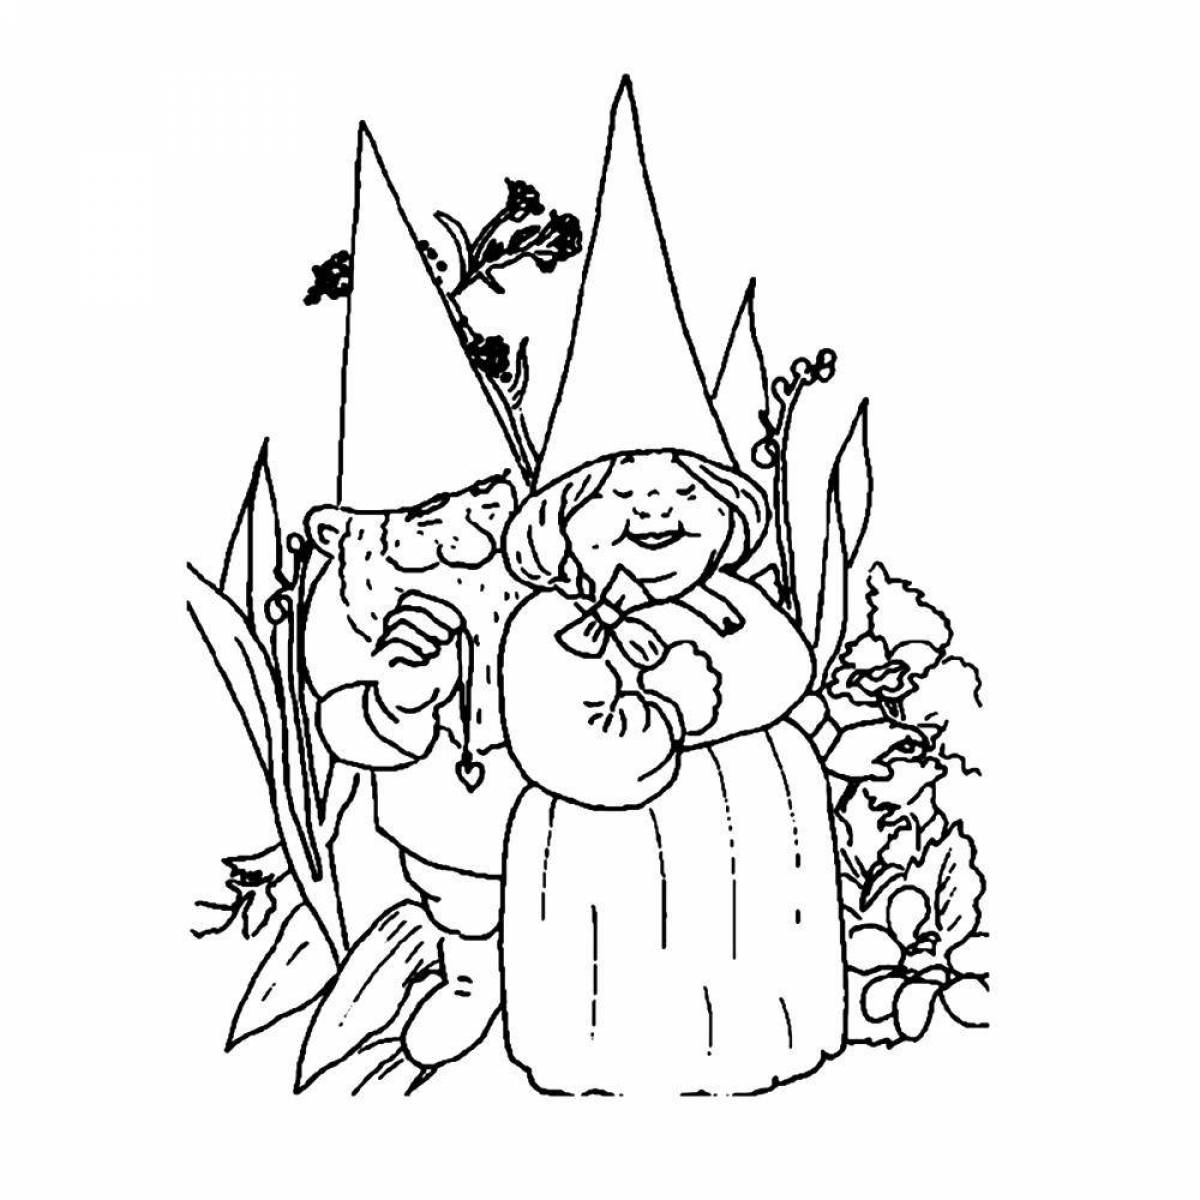 Coloring page mysterious inhabitants